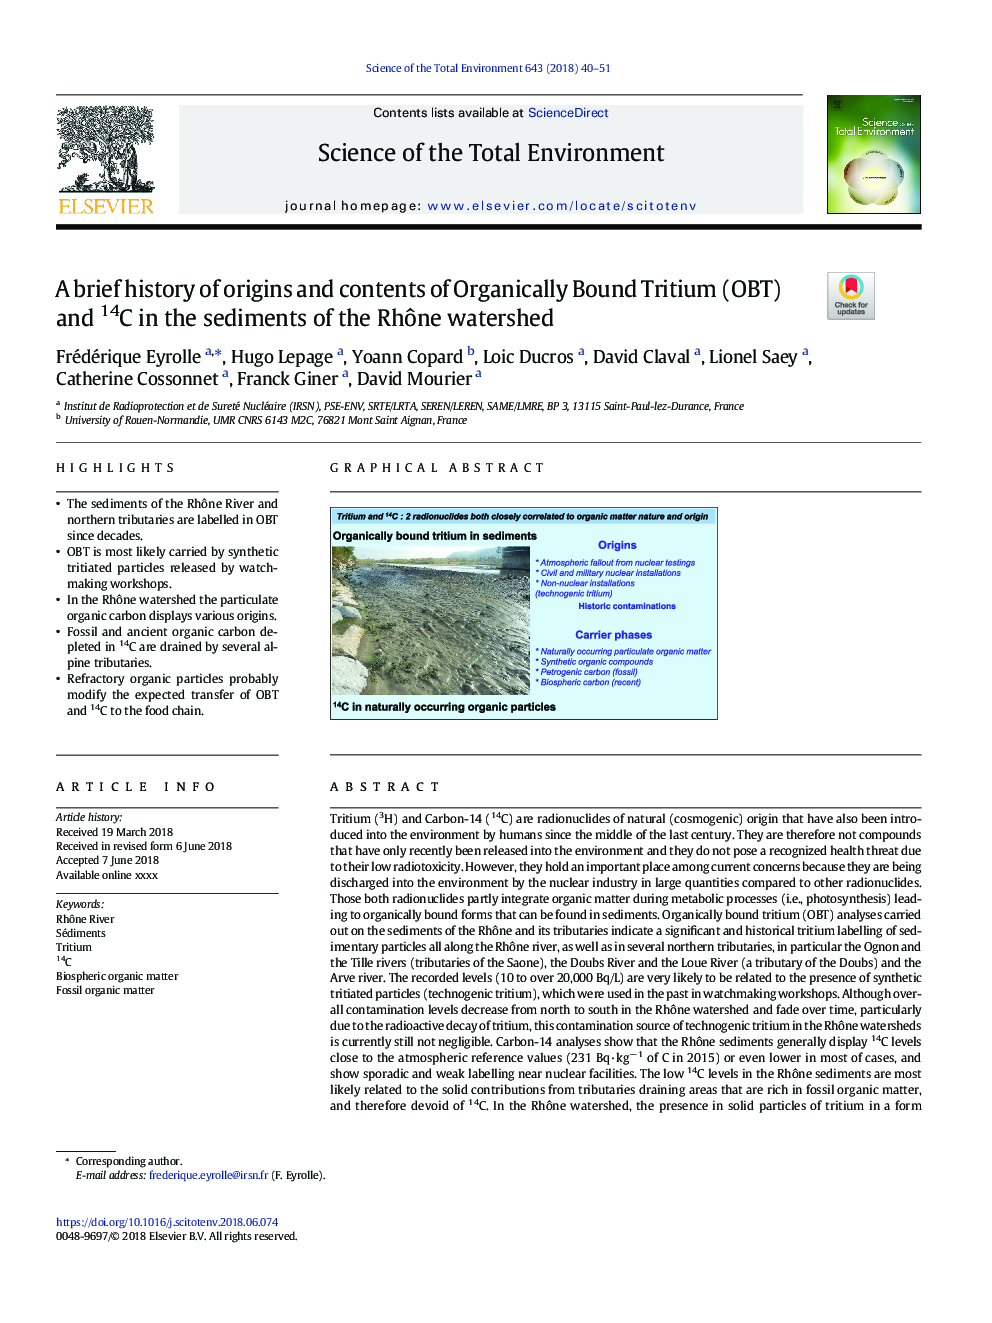 A brief history of origins and contents of Organically Bound Tritium (OBT) and 14C in the sediments of the RhÃ´ne watershed